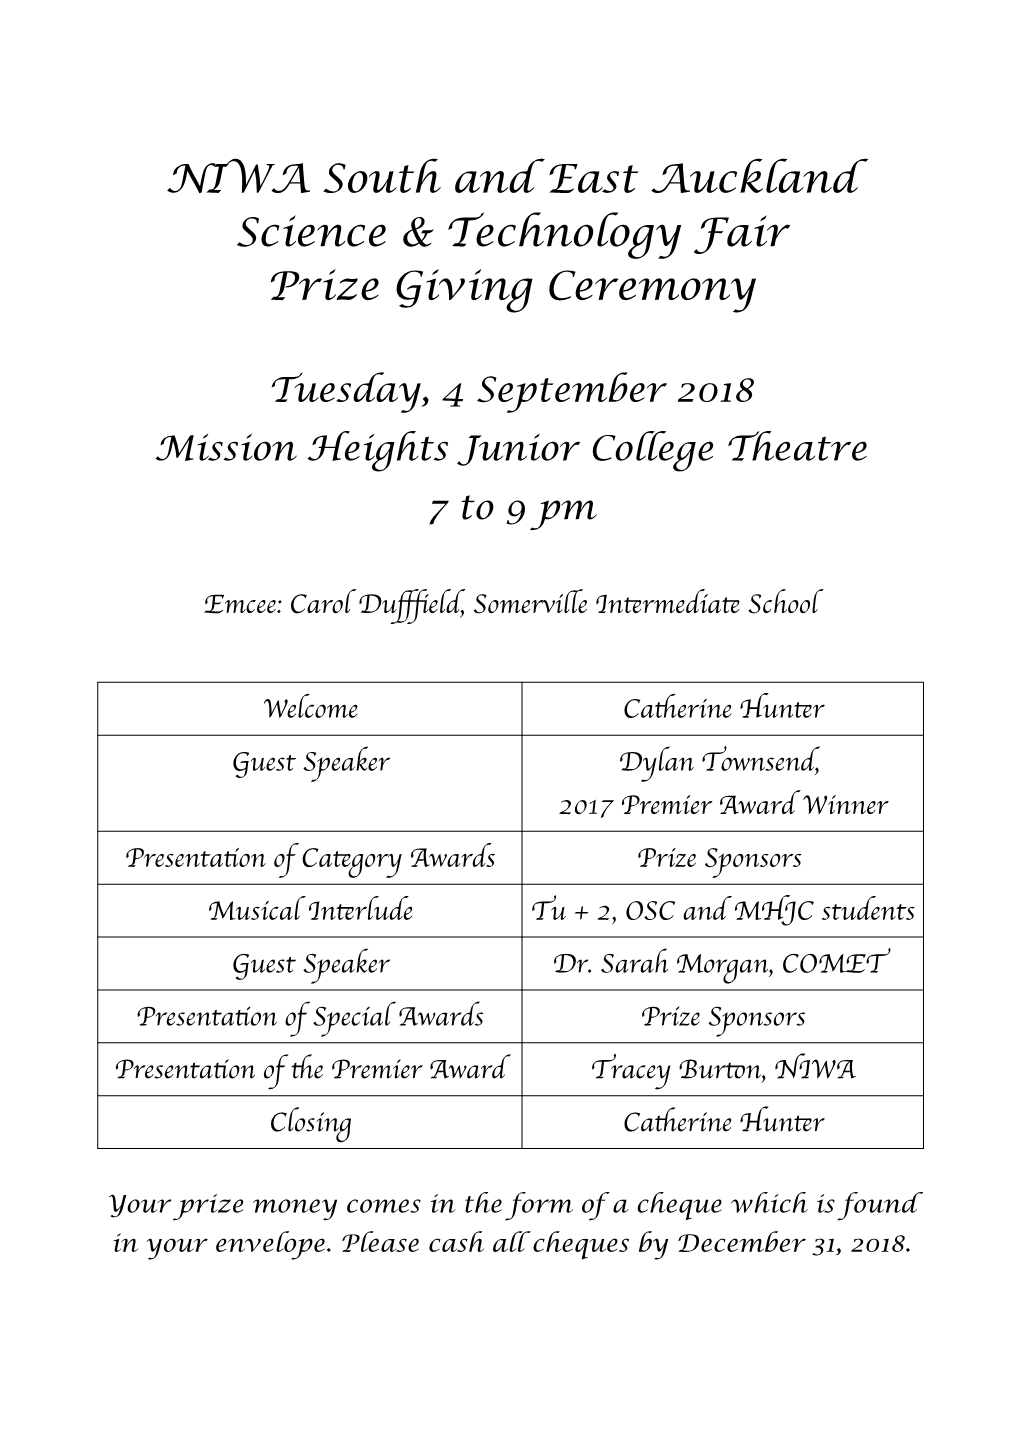 NIWA South and East Auckland Science & Technology Fair Prize